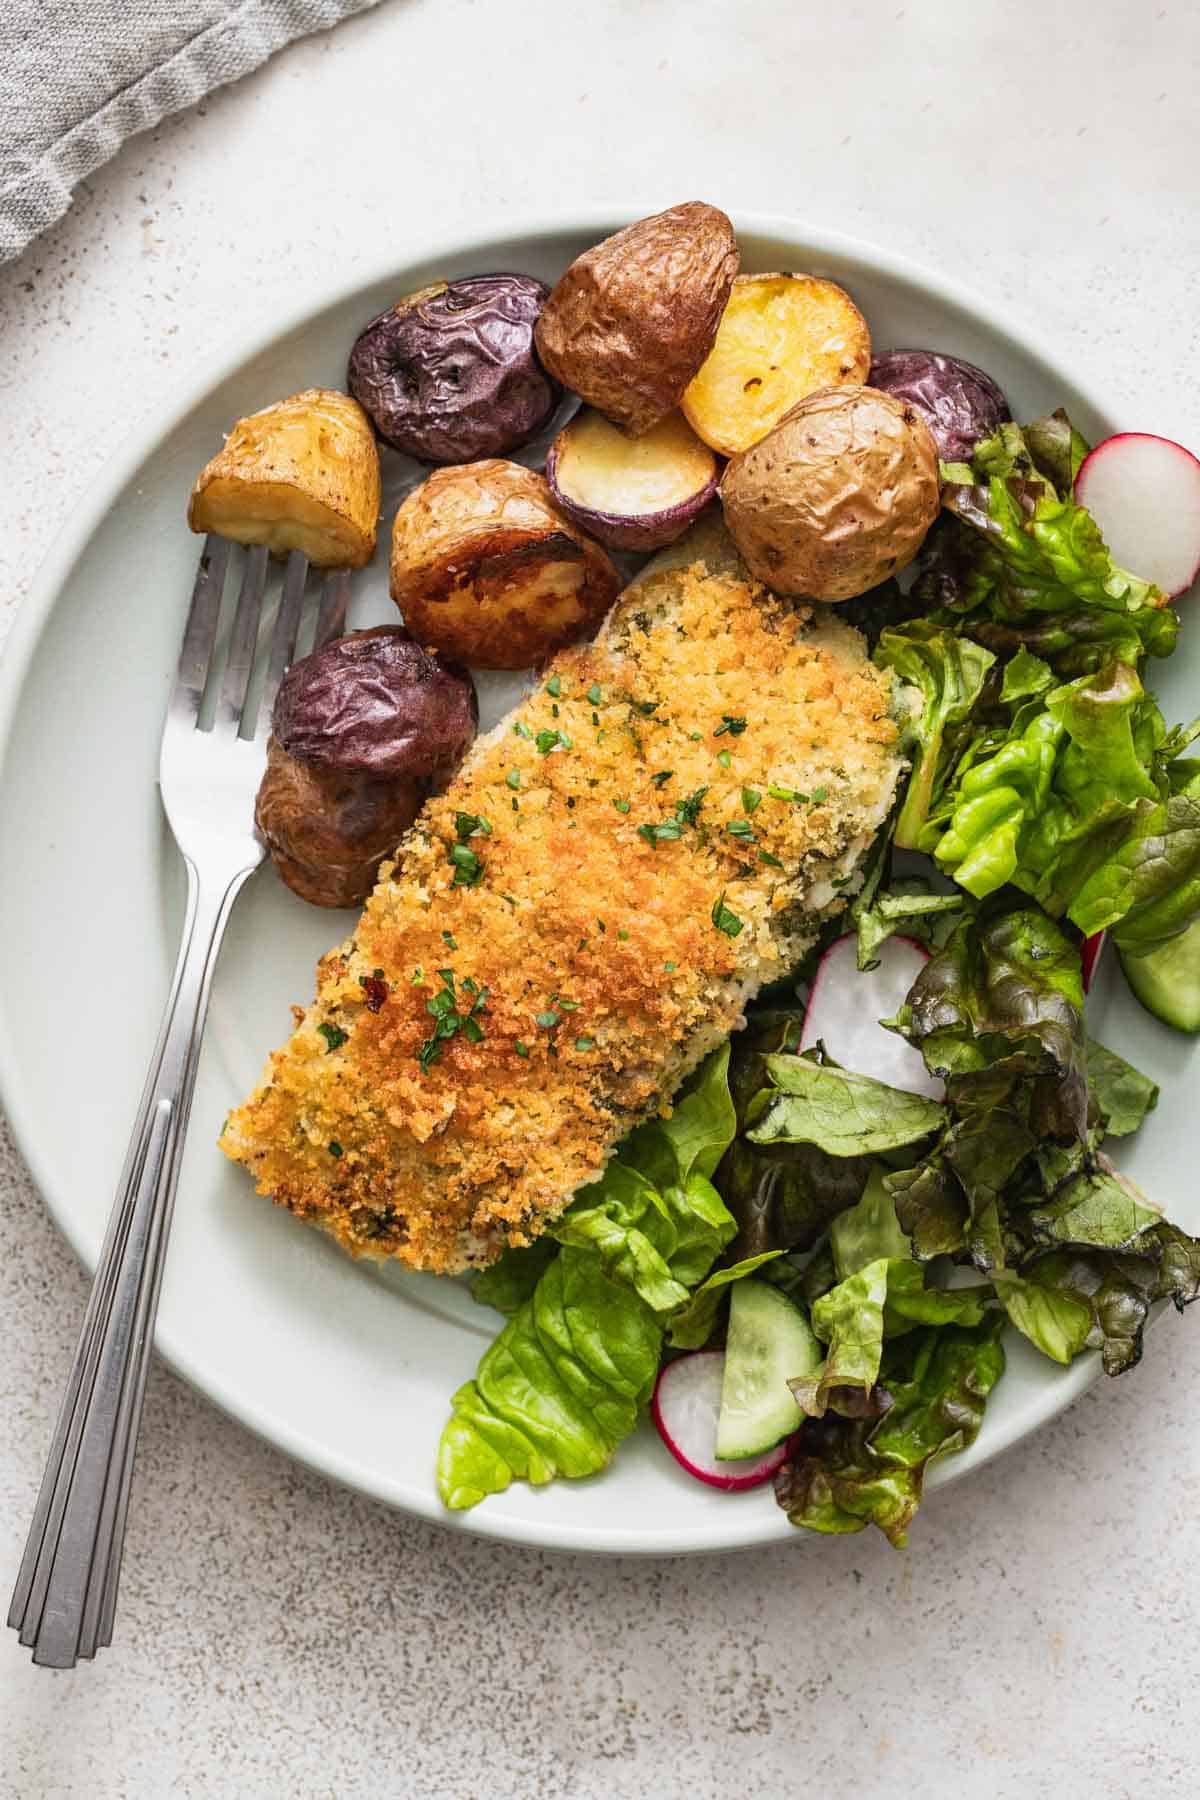 Panko crusted halibut on a plate with multi-colored roasted potatoes and a green salad.